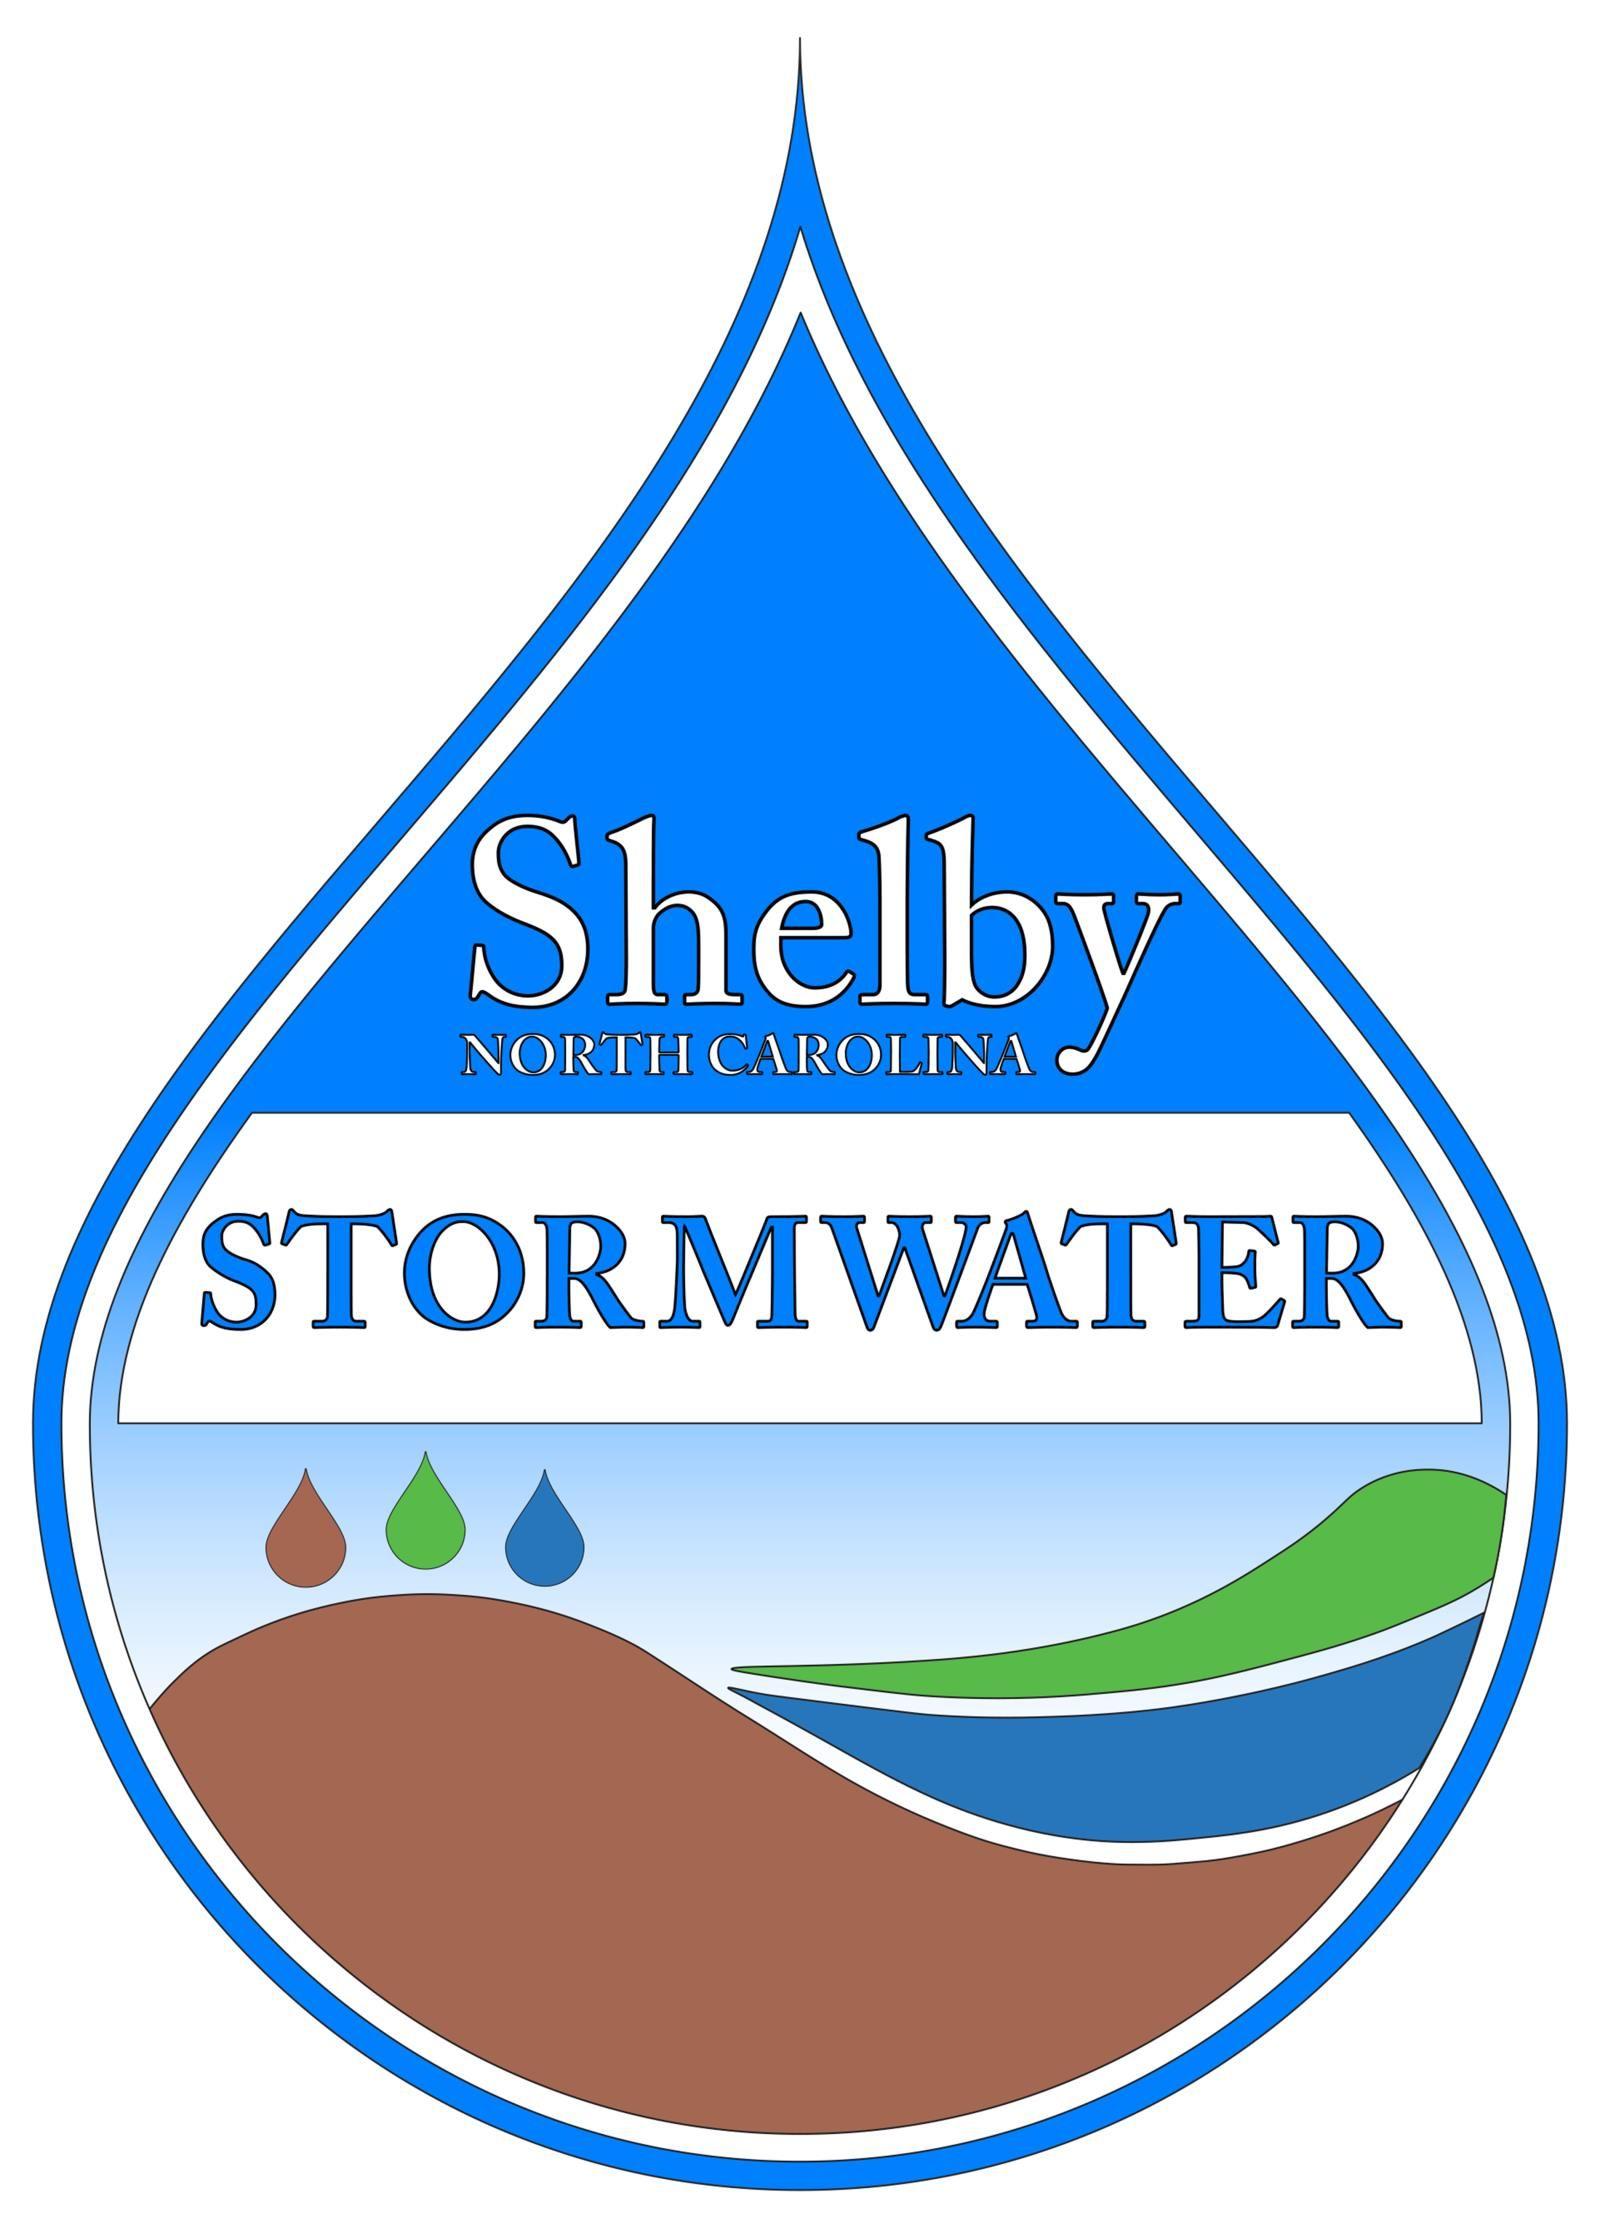 Stormwater Logo - Stormwater. City of Shelby